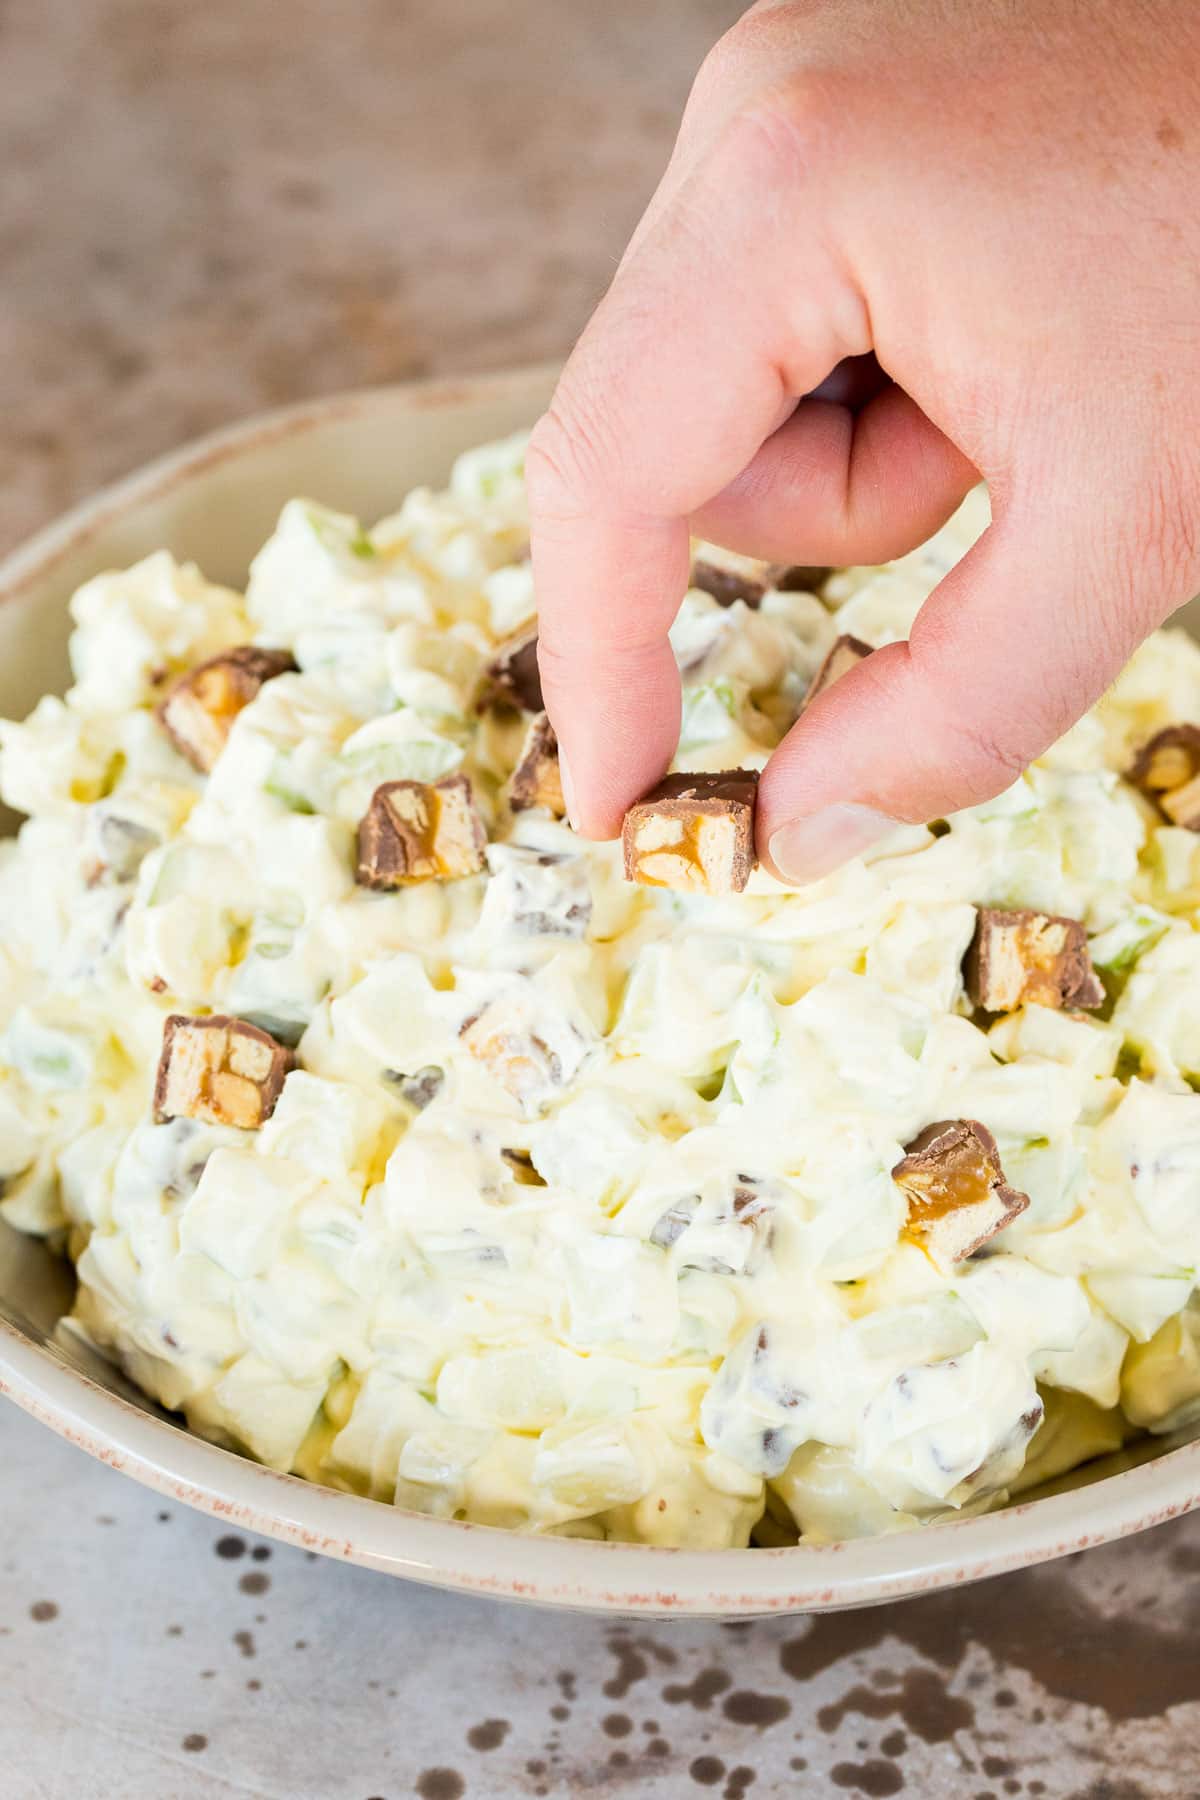 A hand placing chopped candy bars on apple salad.